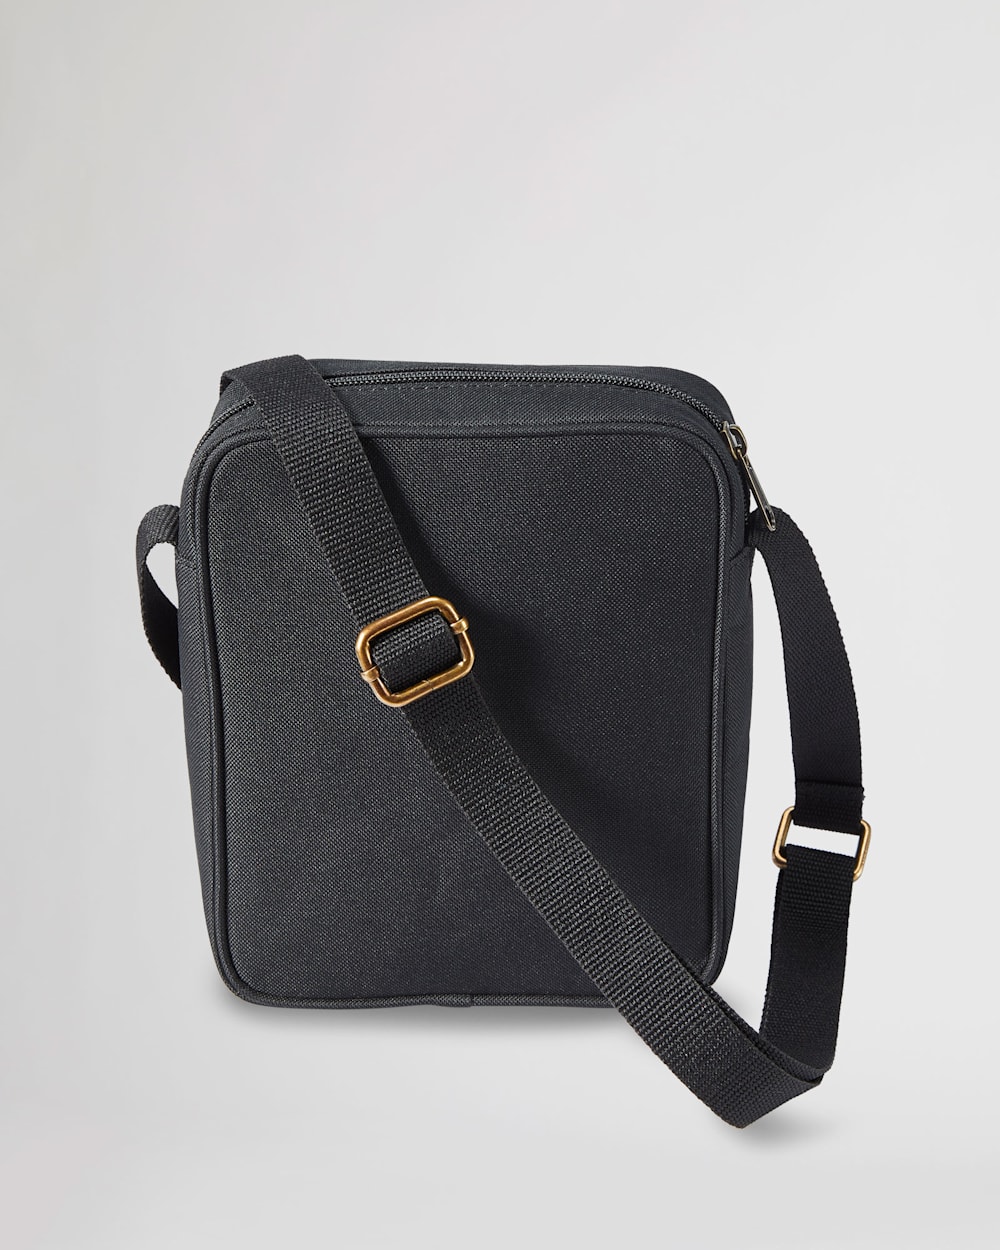 ALTERNATE VIEW OF CROSSBODY SATCHEL IN BLACK ECHO CANYON image number 2